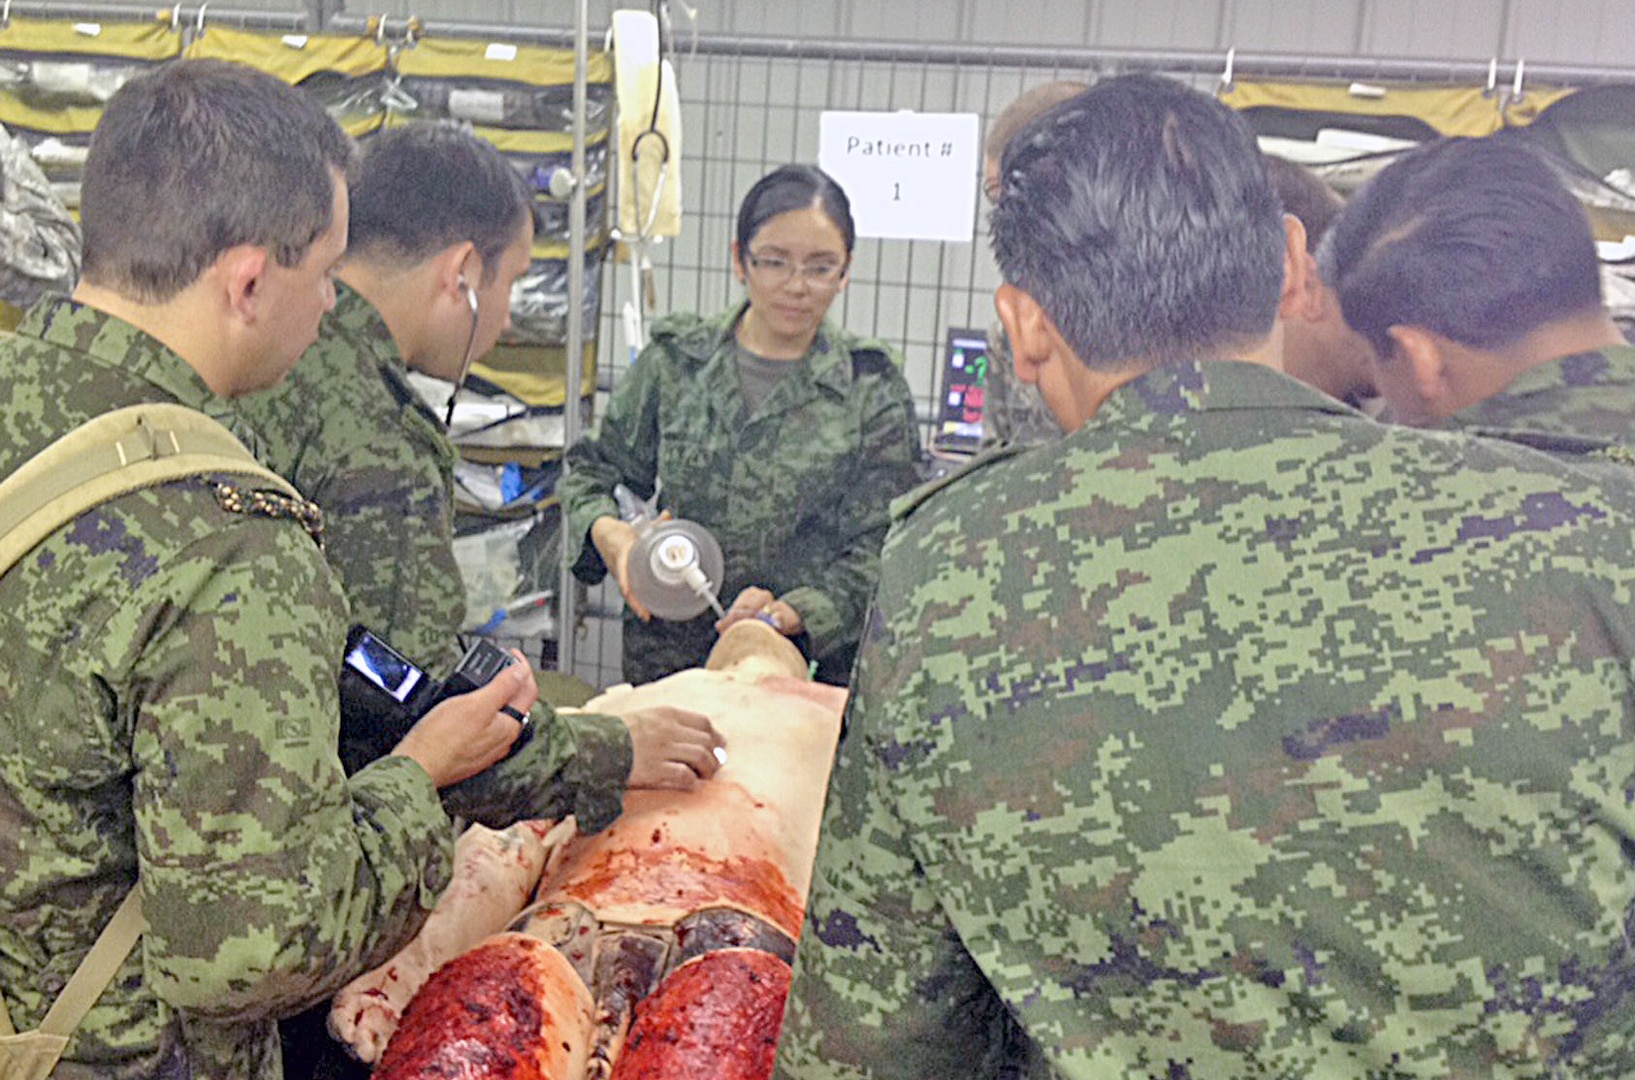 Mexican army Maj. Carina Castro (center), an anesthesiologist with the Mexican army’s medical officers corps, leads her fellow medical officers through a procedure while observing training Sept. 19 at Joint Base San Antonio-Camp Bullis.
Photo by Maj. Jim Marckwardt